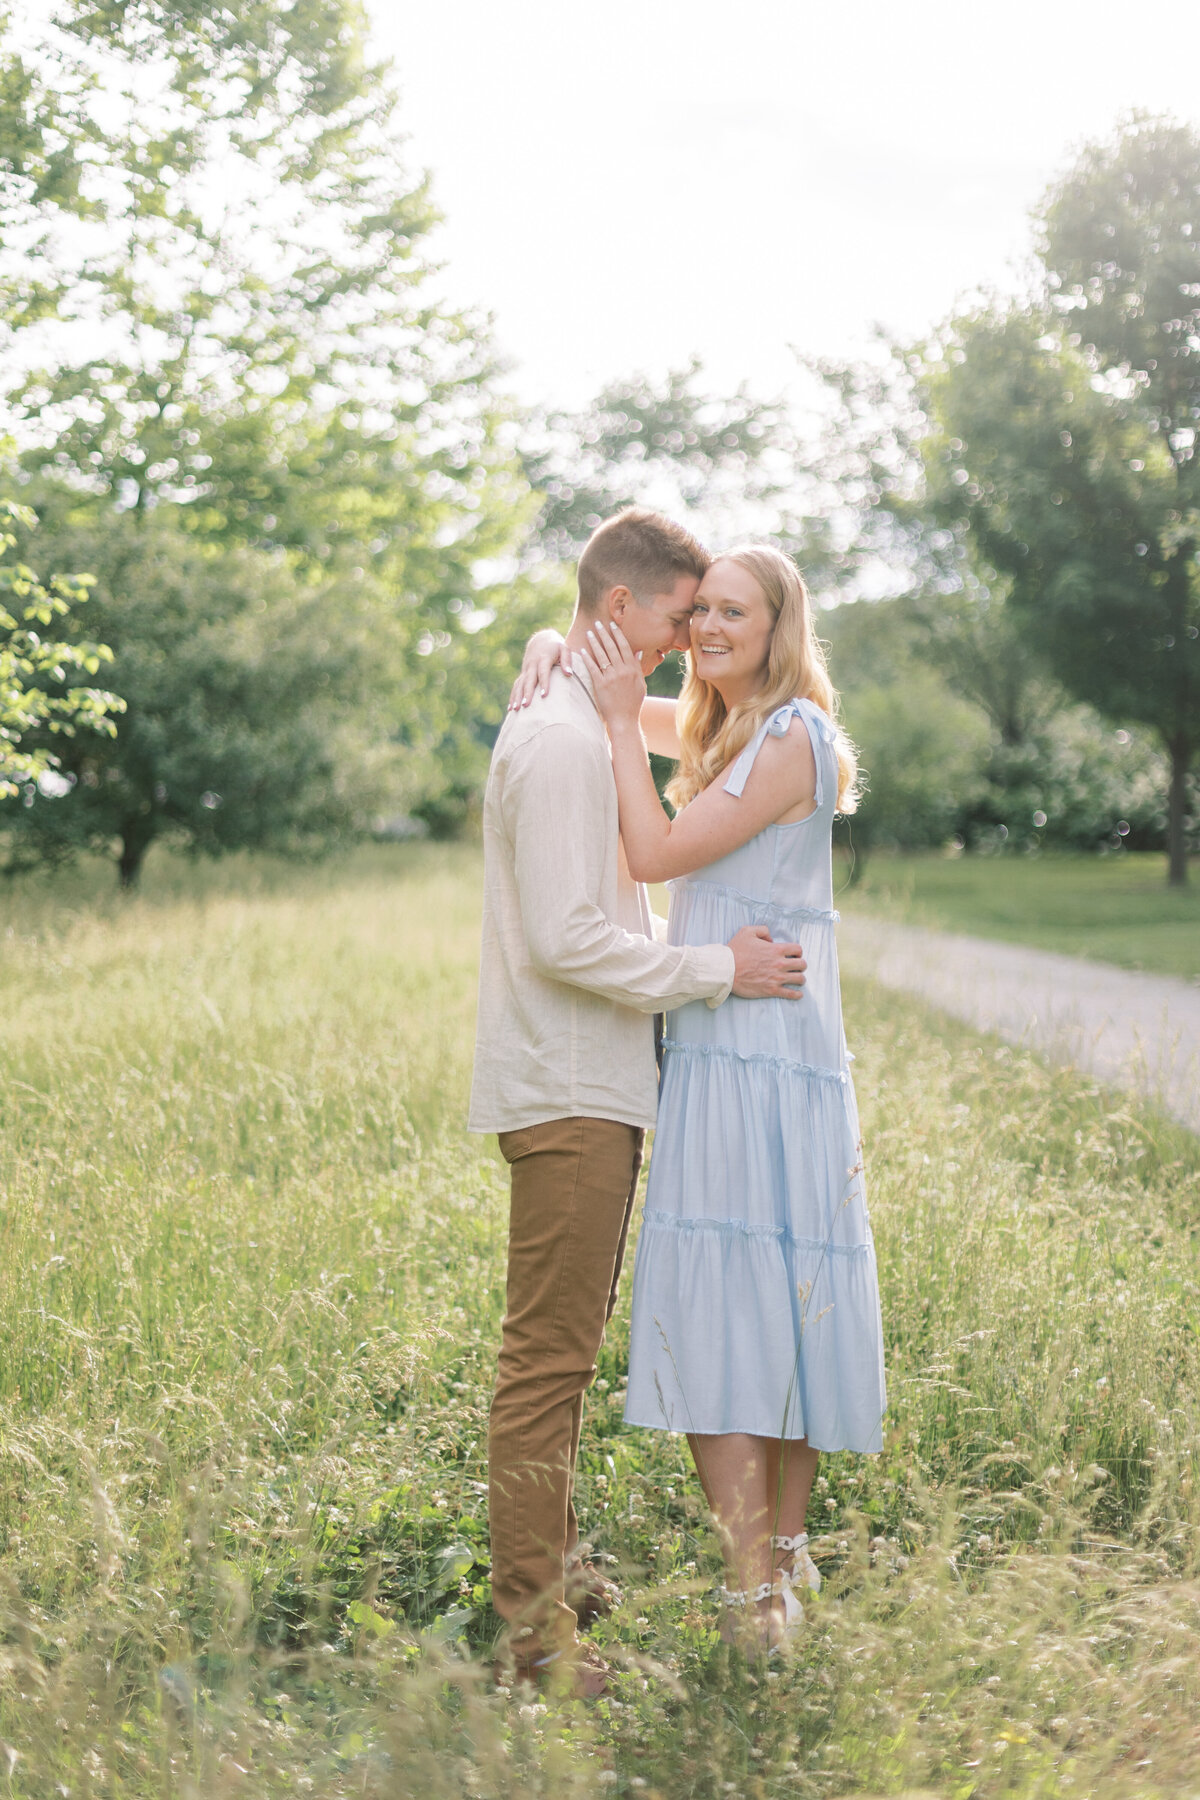 amber-rhea-photography-midwest-wedding-photographer-stl-engagement210A4809